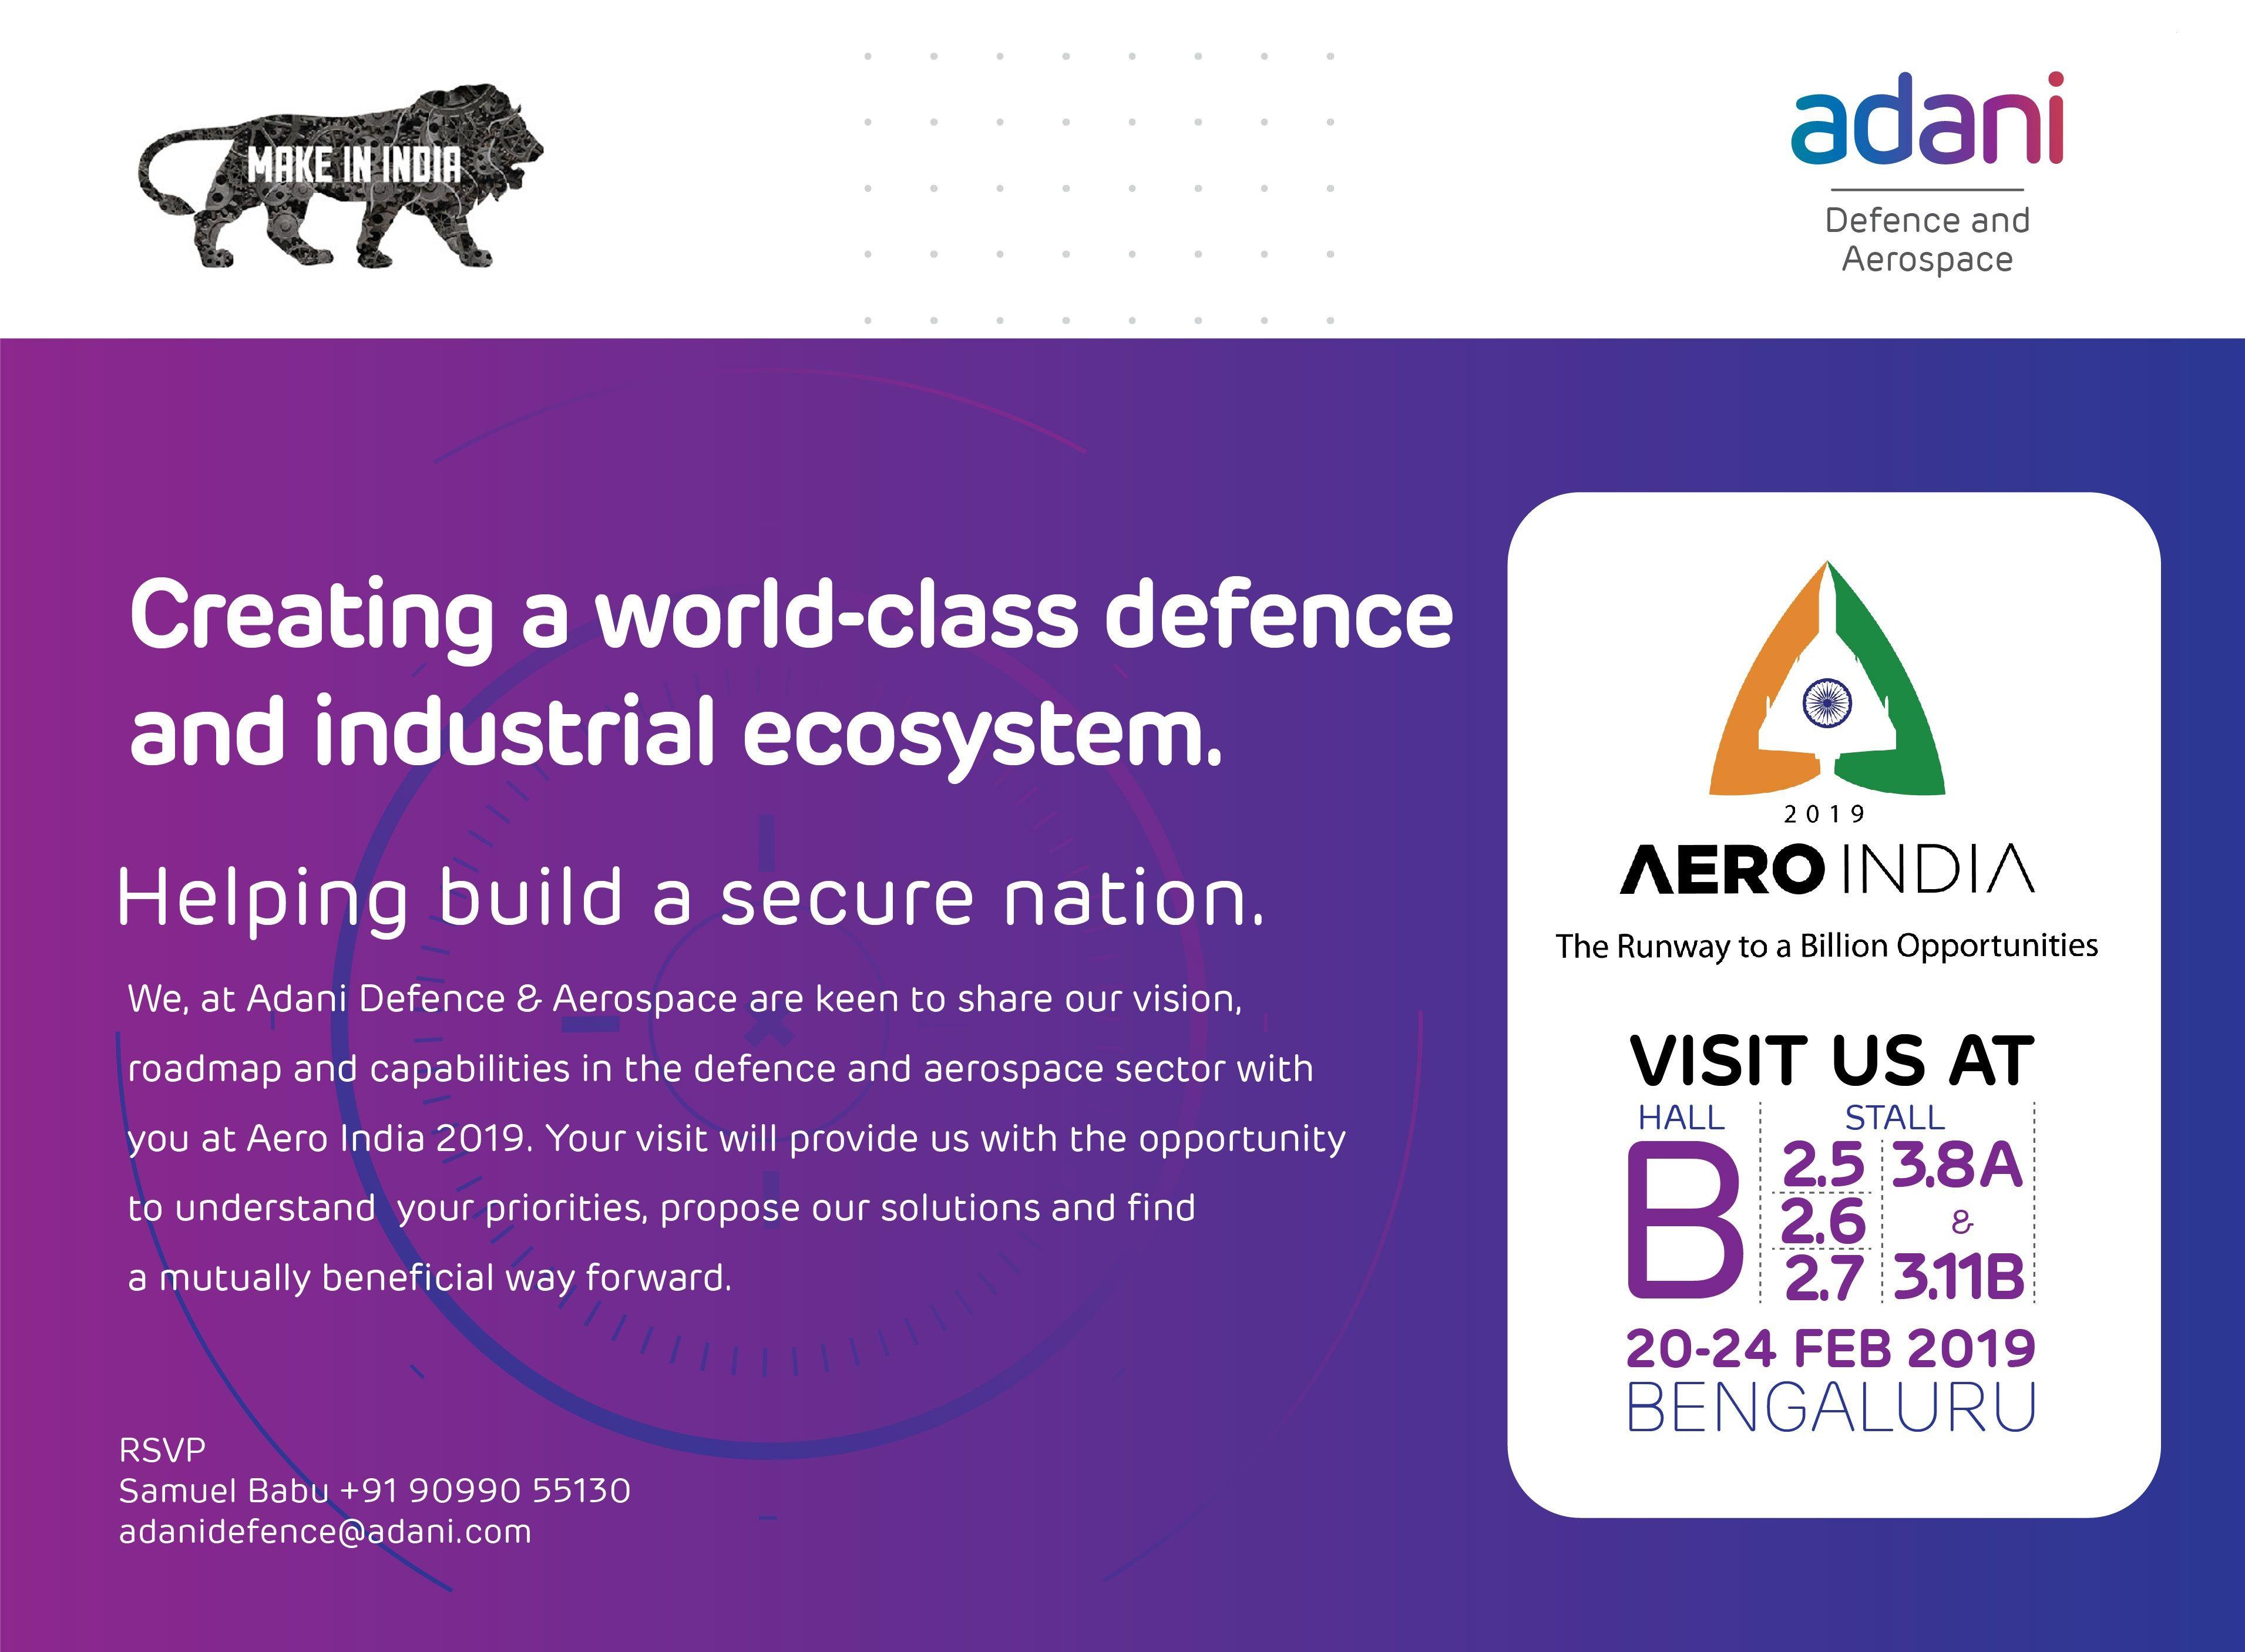 Aerospace and Defense Company Logo - Aerospace and Defence Manufacturing Companies in India